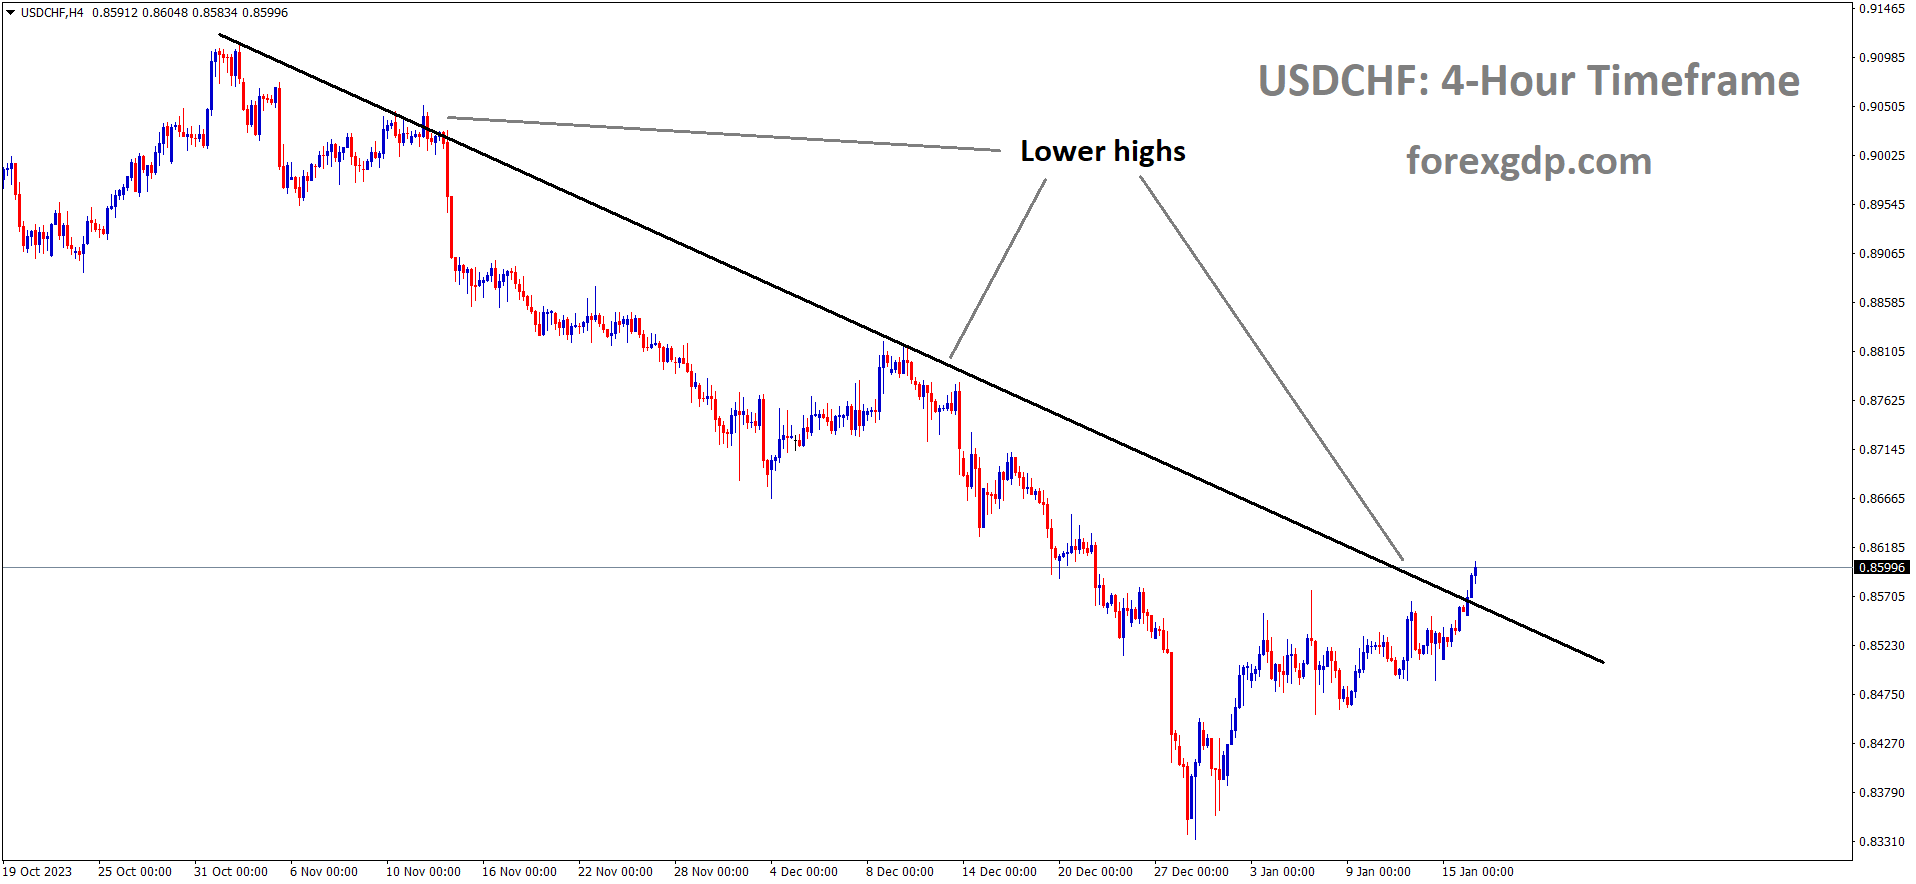 USDCHF is moving in the Downtrend line and the market has reached the lower high area of the trend line